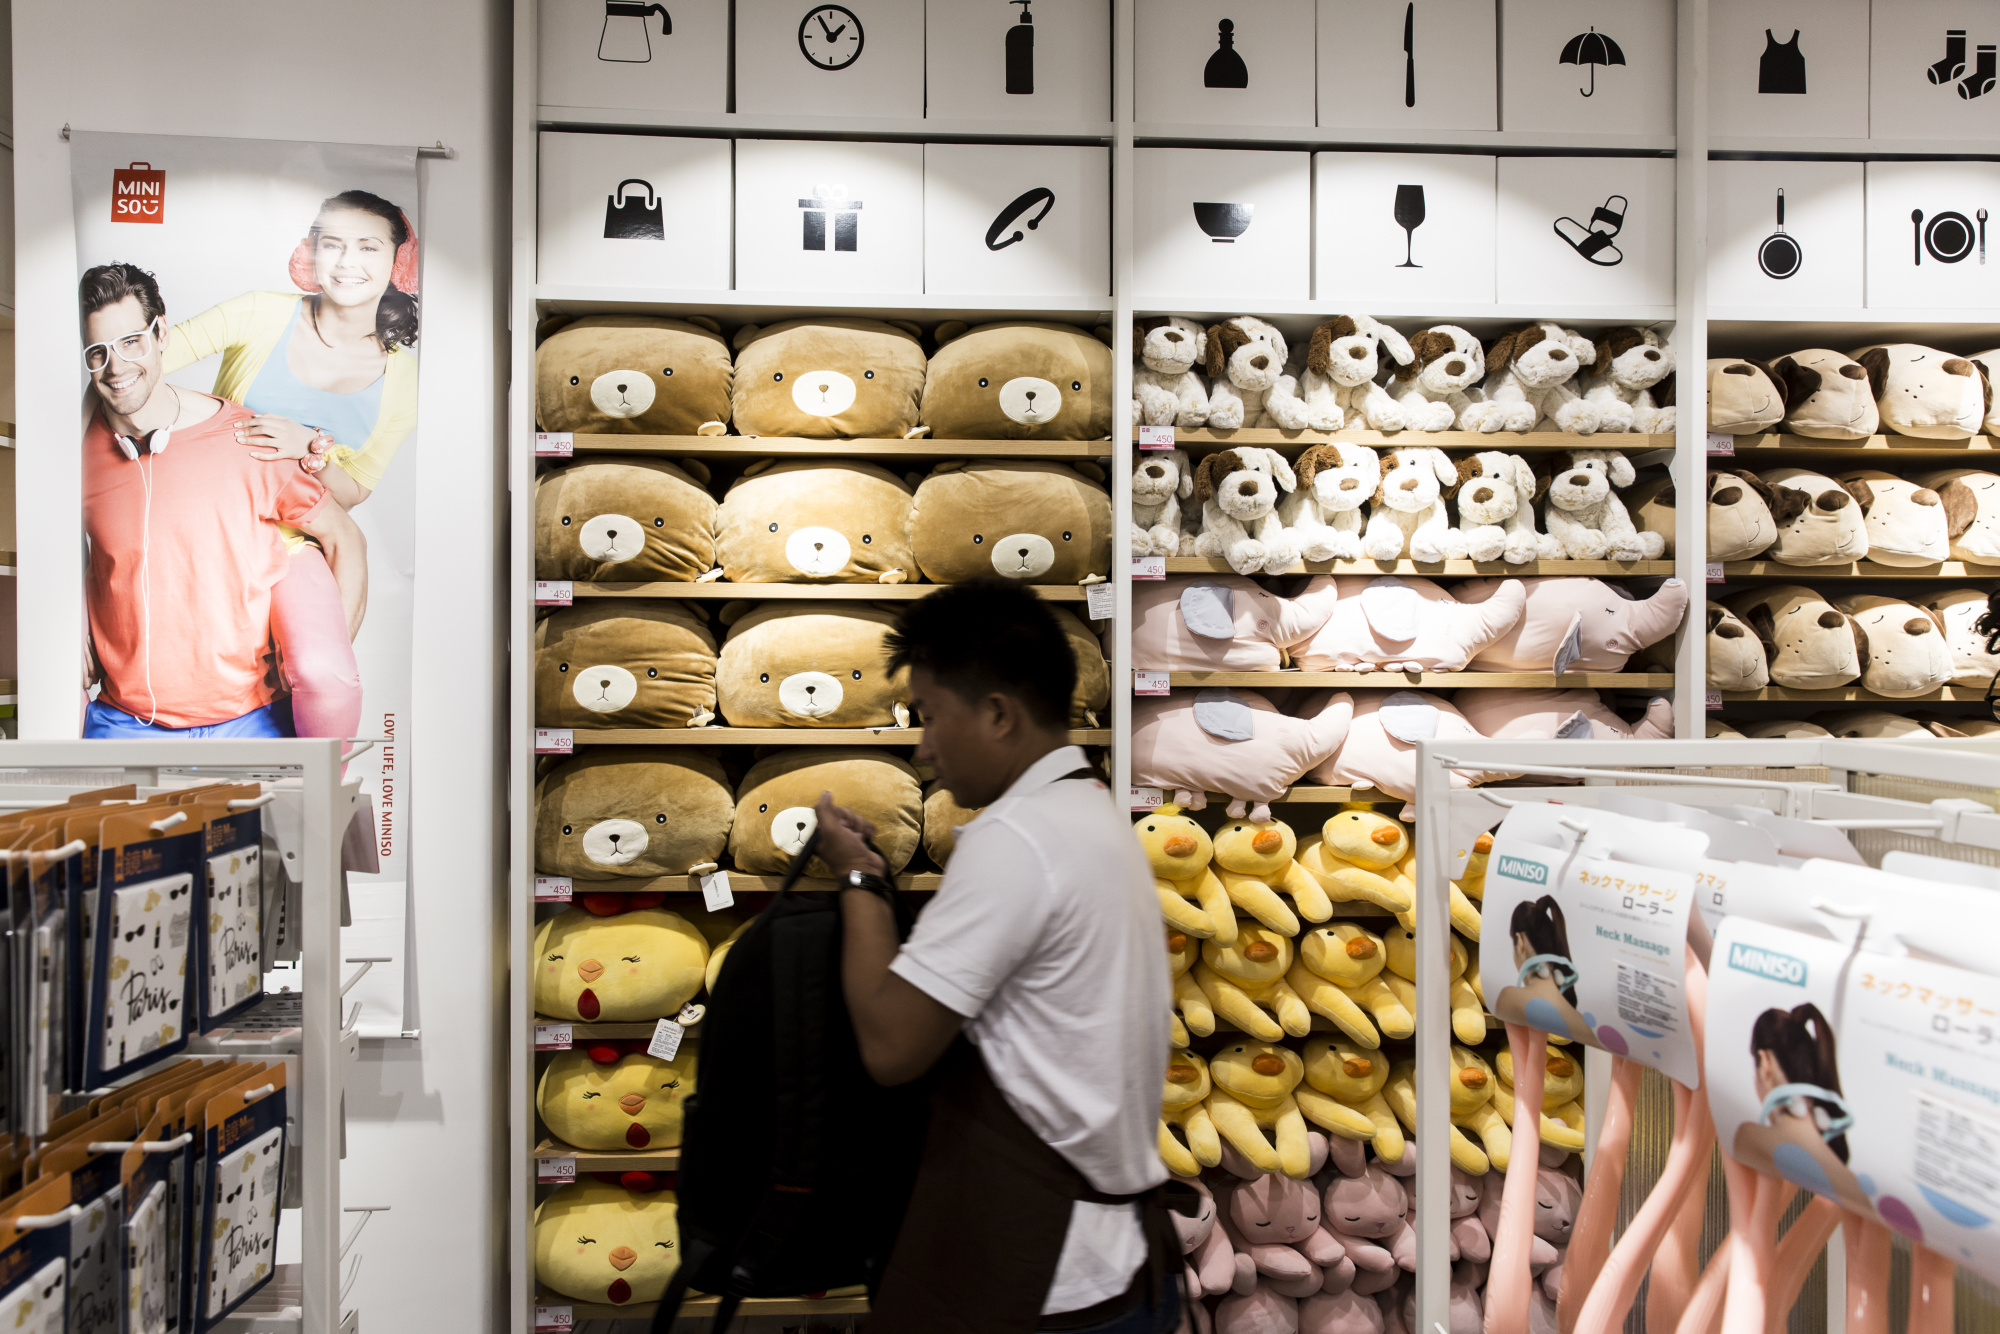 MINISO Opens 20 More New Stores in U.S. amid Global Expansion Push